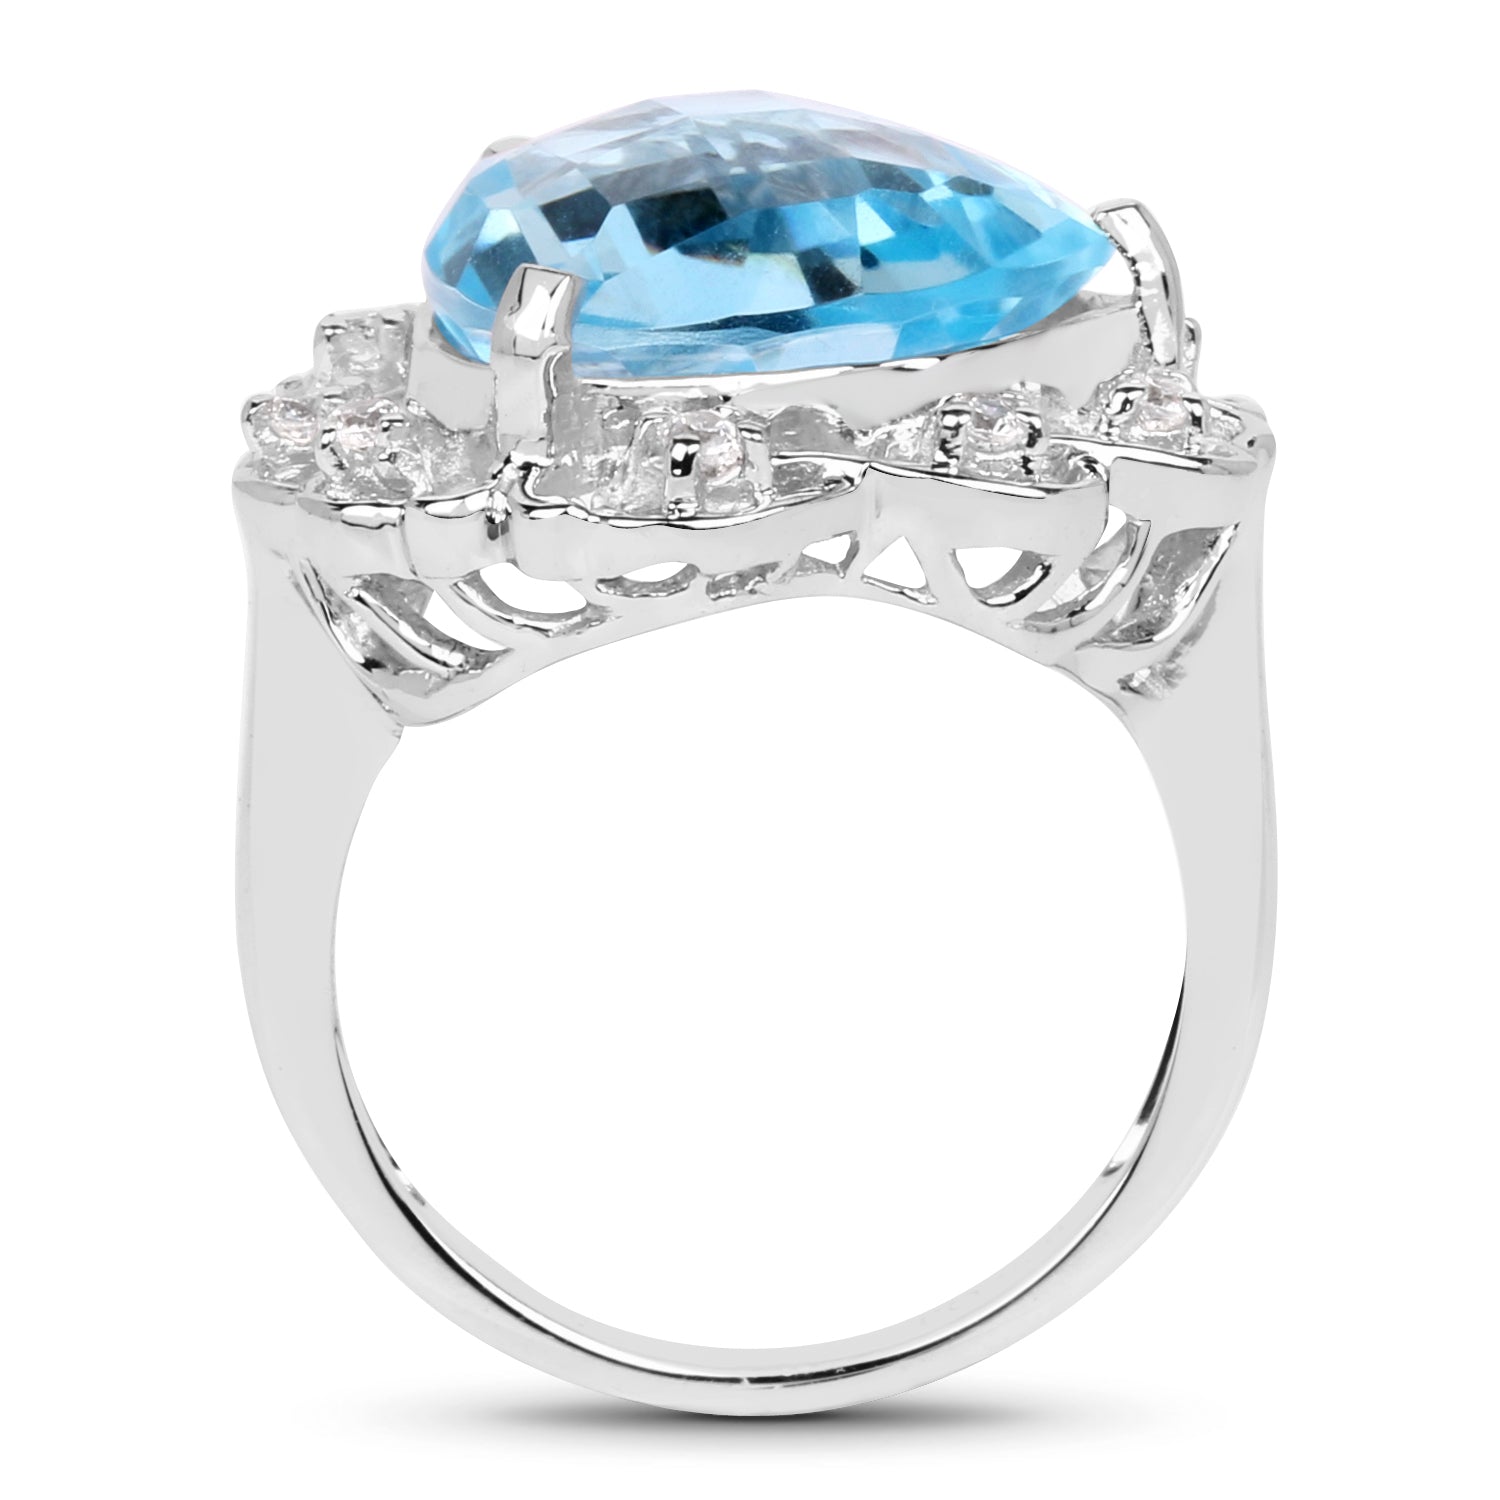 Blue Topaz and White Zircon Sterling Silver Ring - 11.01 ctw, Trillion Cut Stone, December Birthstone, Gift for Her Bijou Her